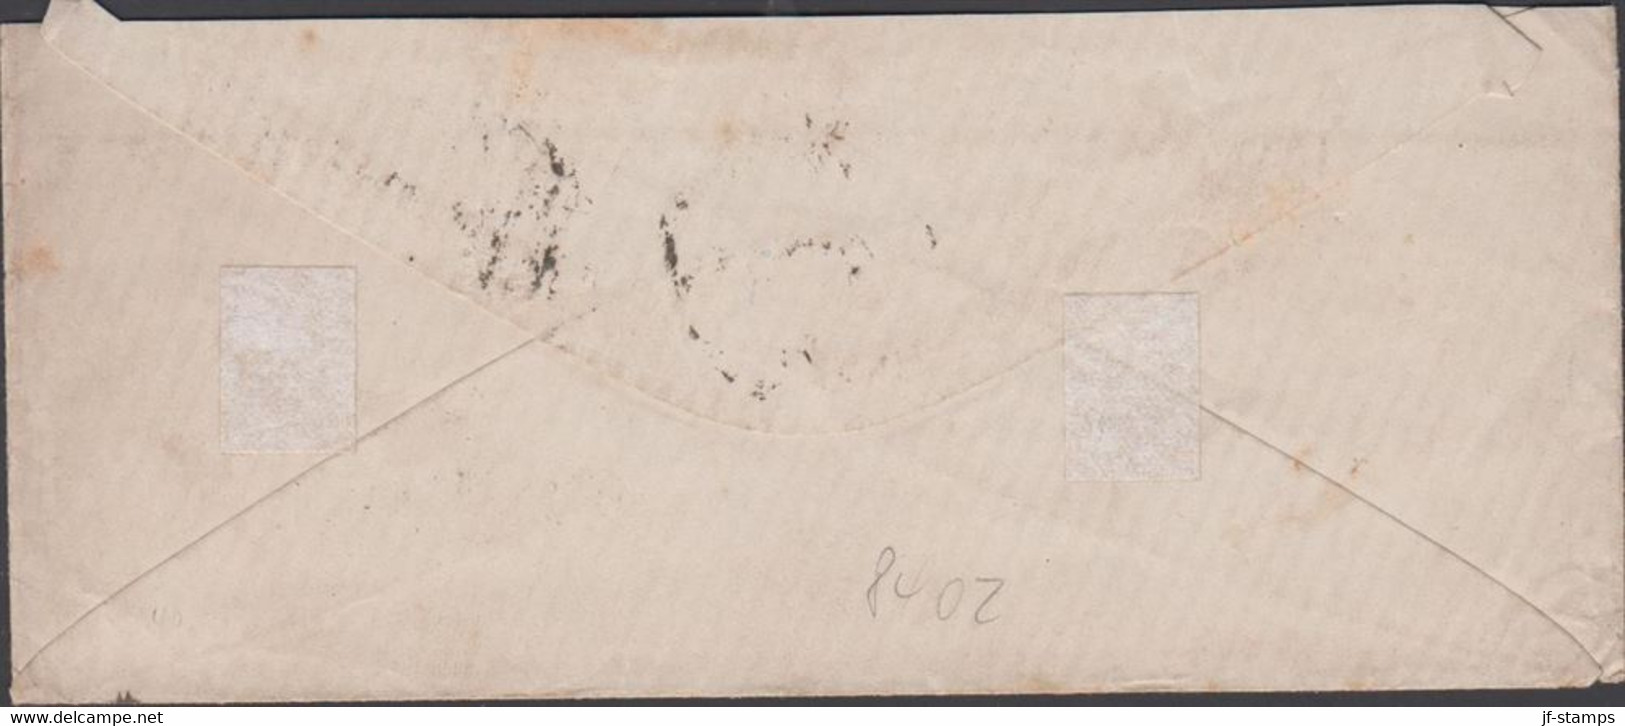 1871. NORGE. Small Nice Cover To Stavanger Cancelled CHRISTIANIA 13 12 1871 + CHRA BYP. 12 12 71. Interest... - JF427642 - ...-1855 Vorphilatelie